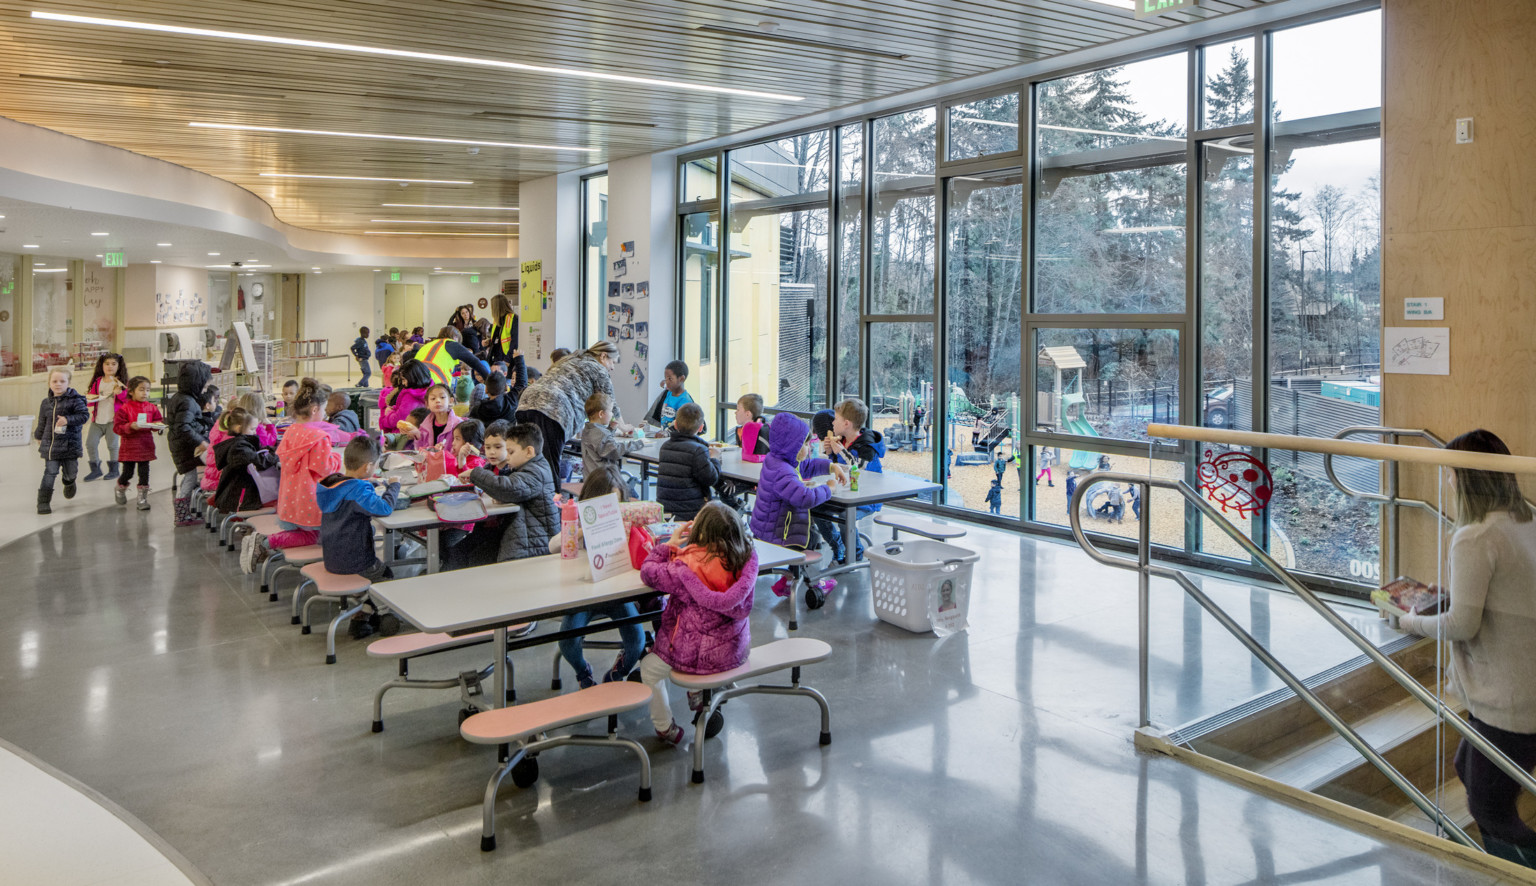 A lunch room with floor to ceiling windows with views of the playground. Above, a curved wood ceiling detail